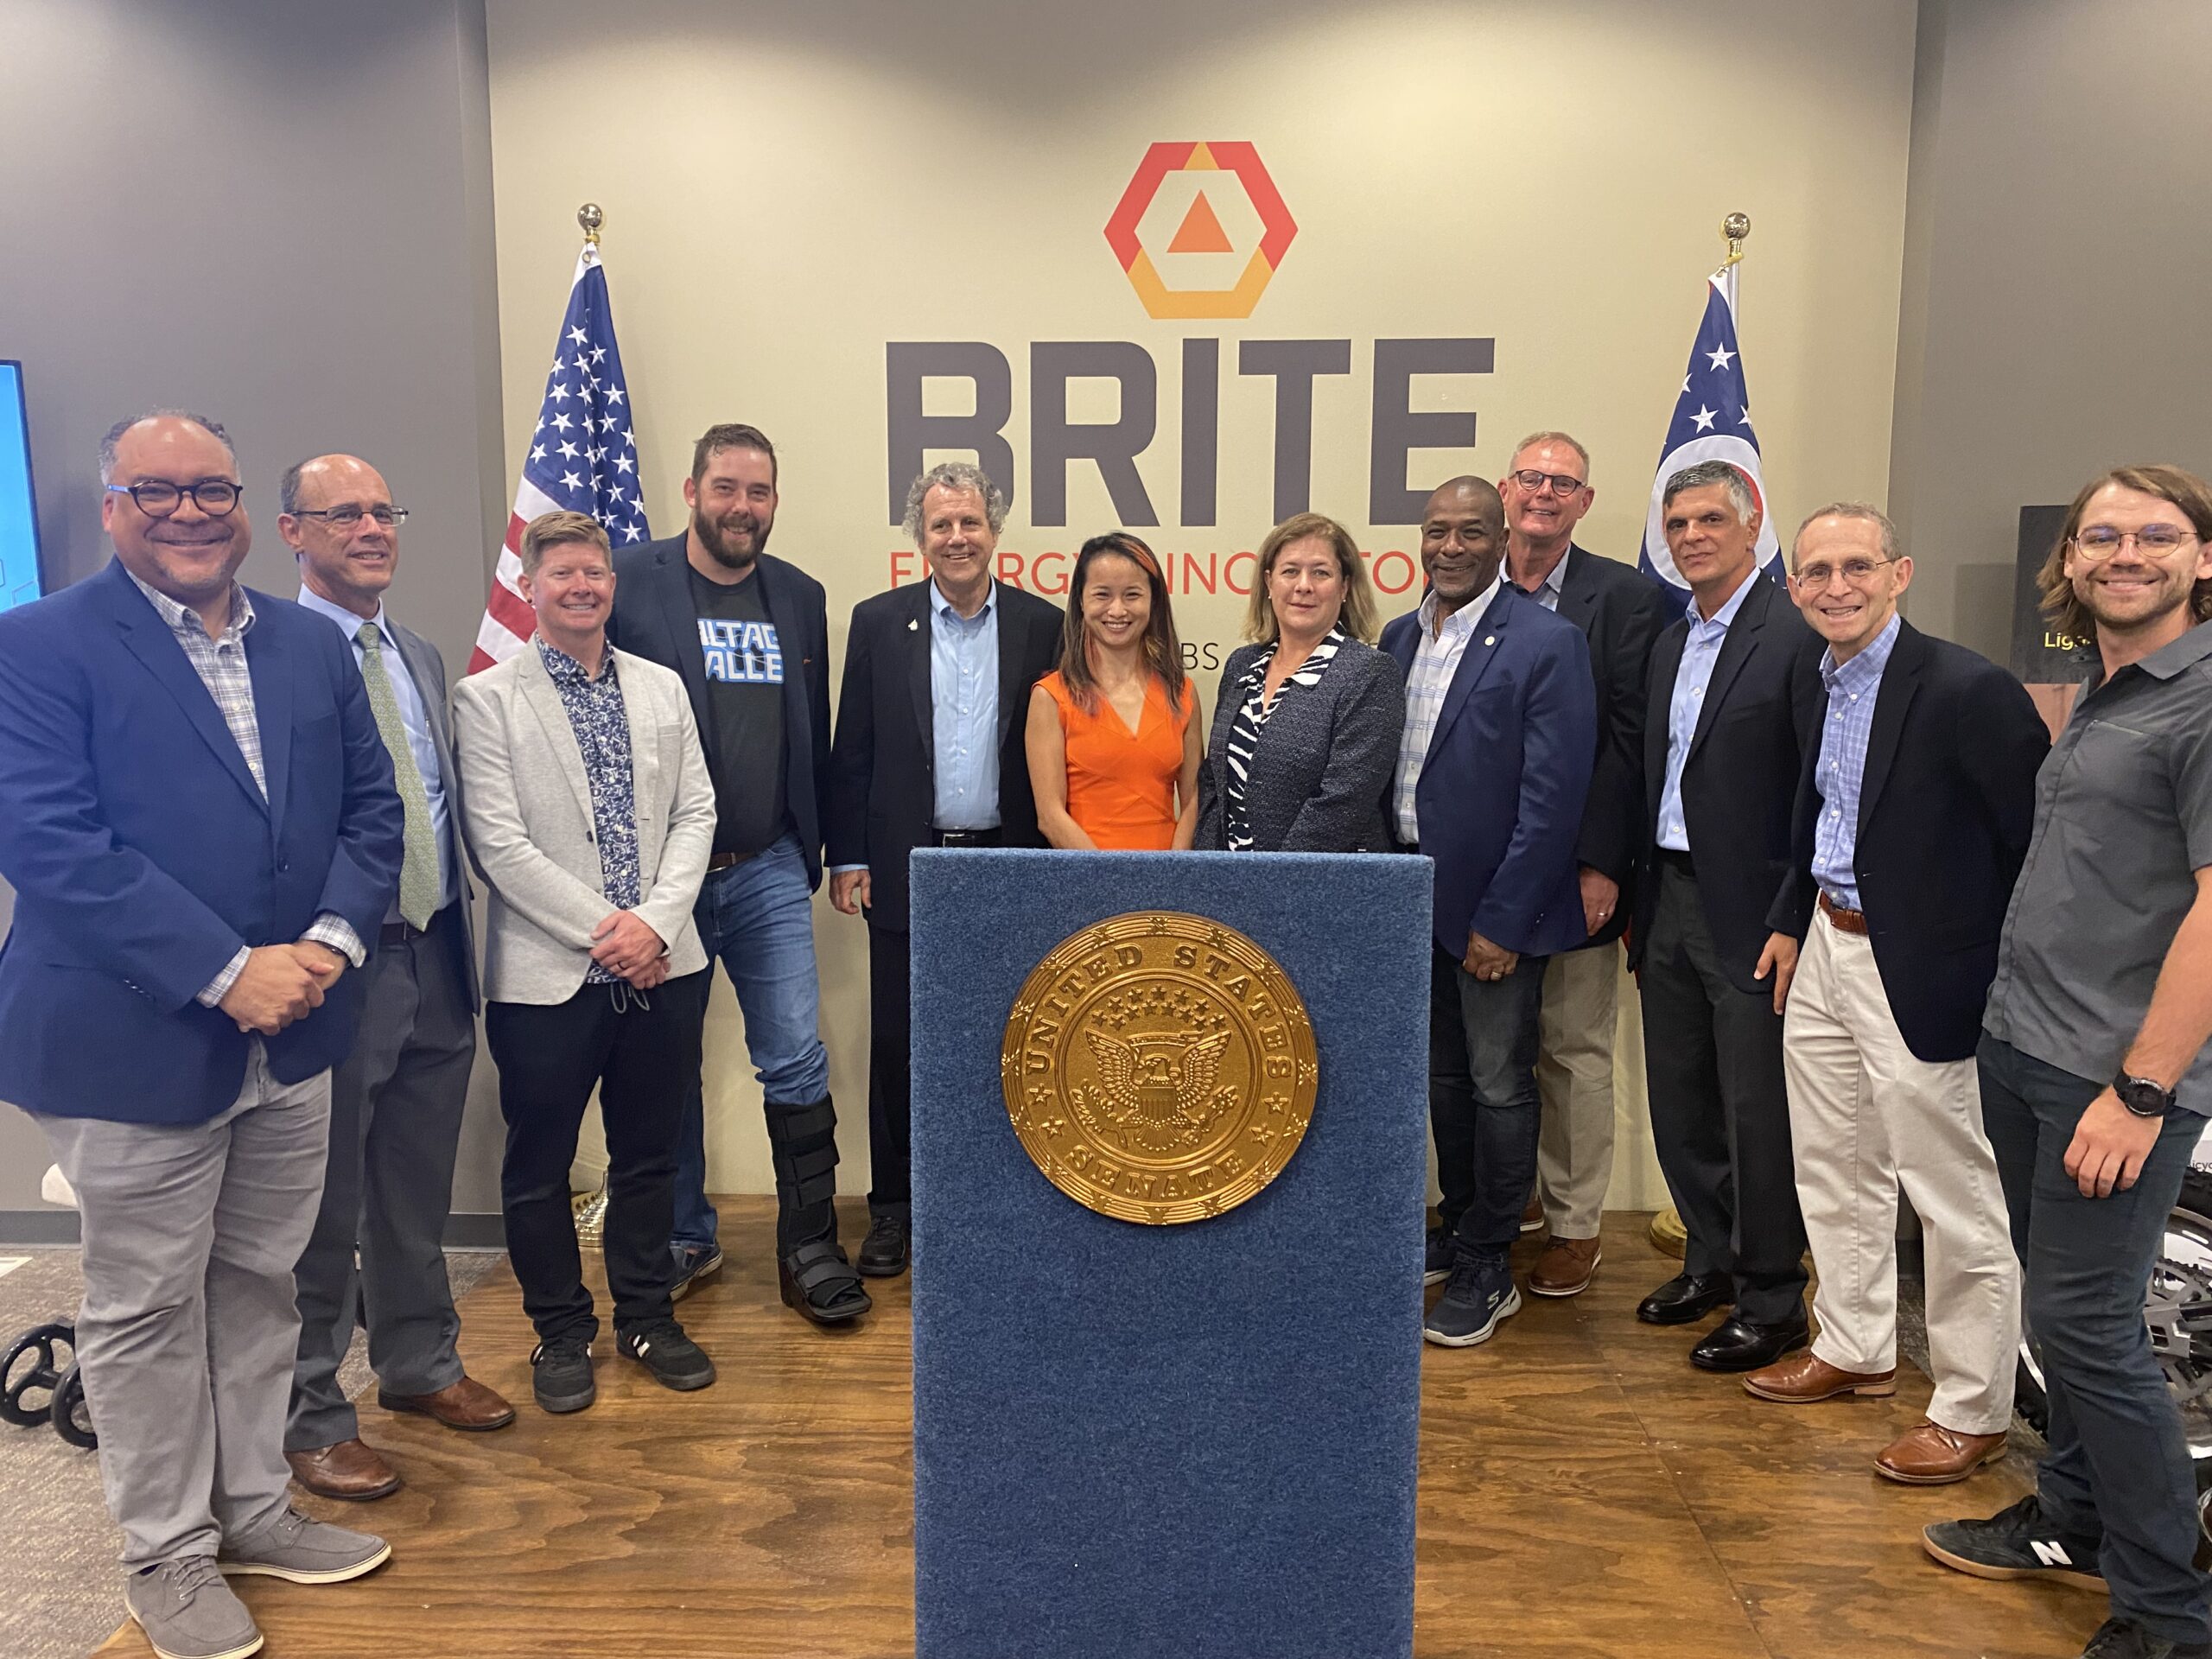 Senator Sherrod Brown and guests post in front of BRITE sign at BRITE headquarters